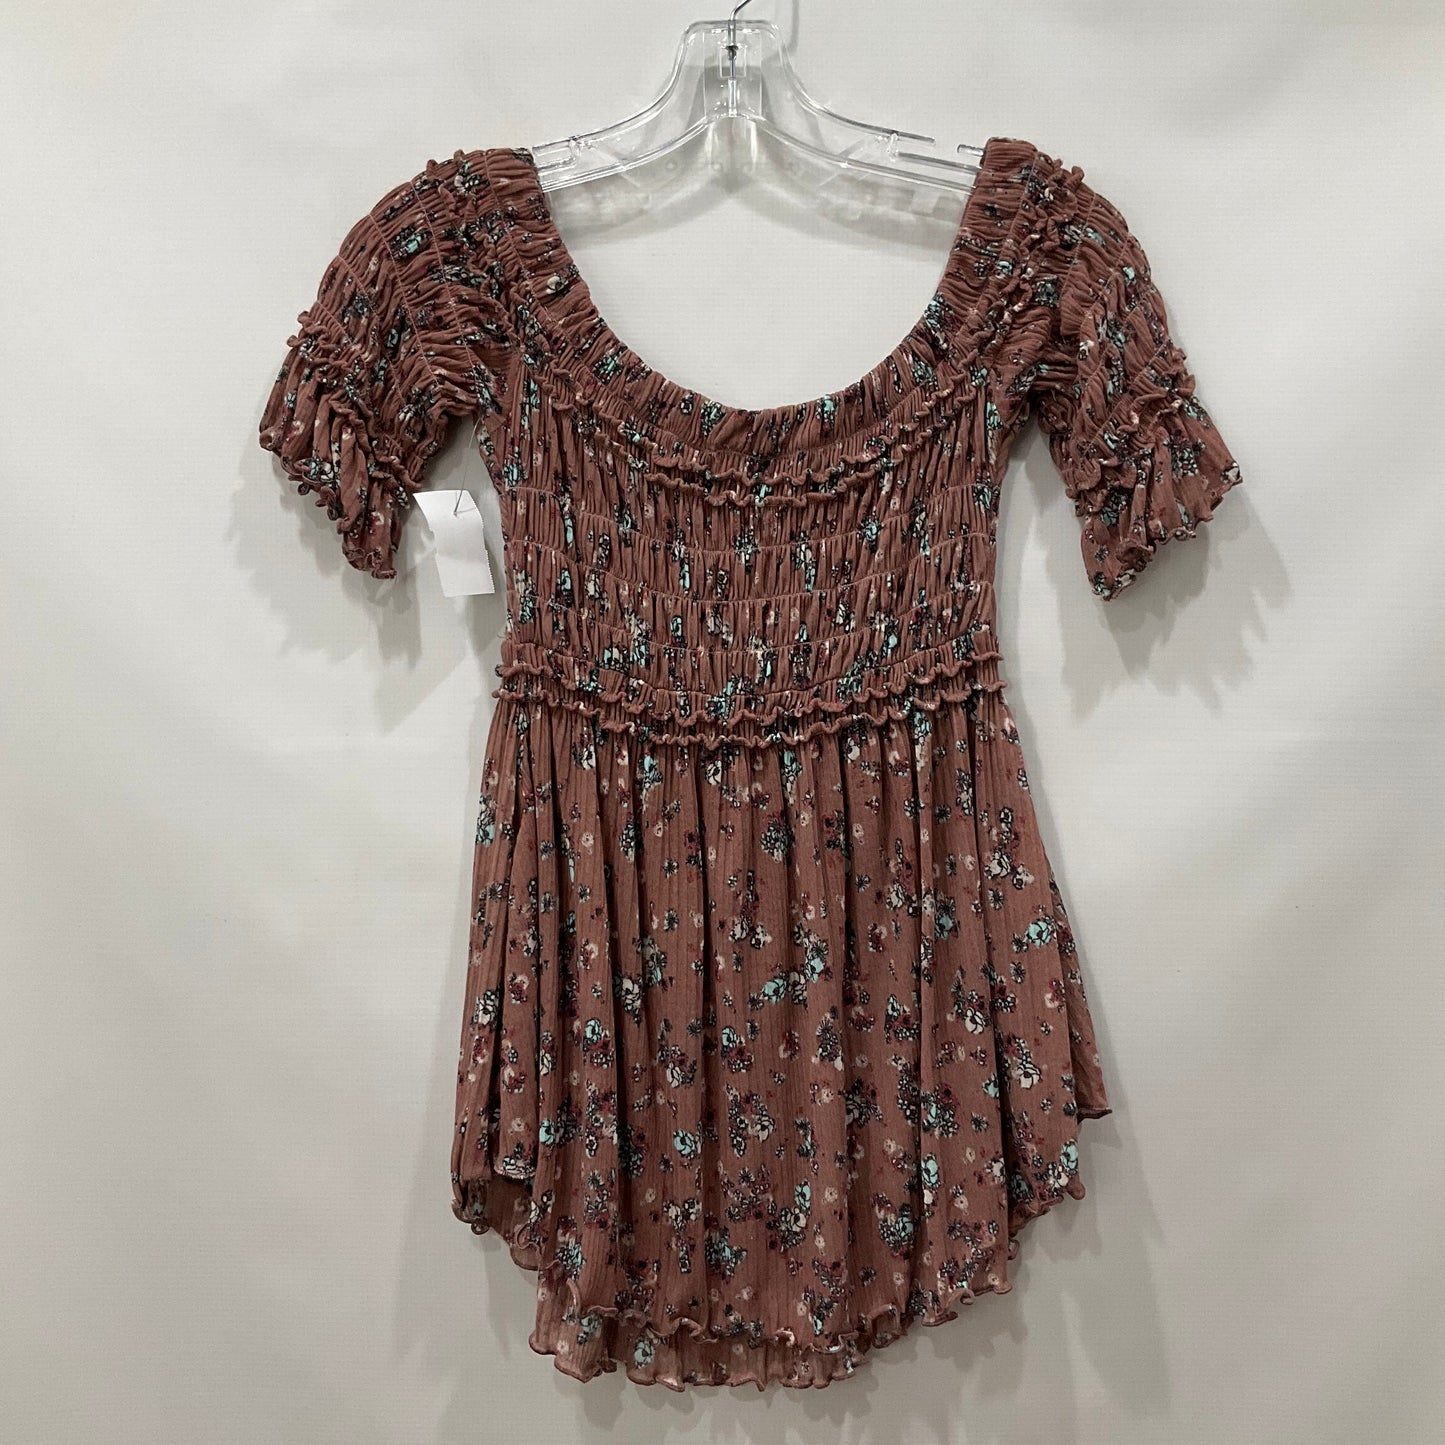 Floral Top Short Sleeve Free People, Size Xs